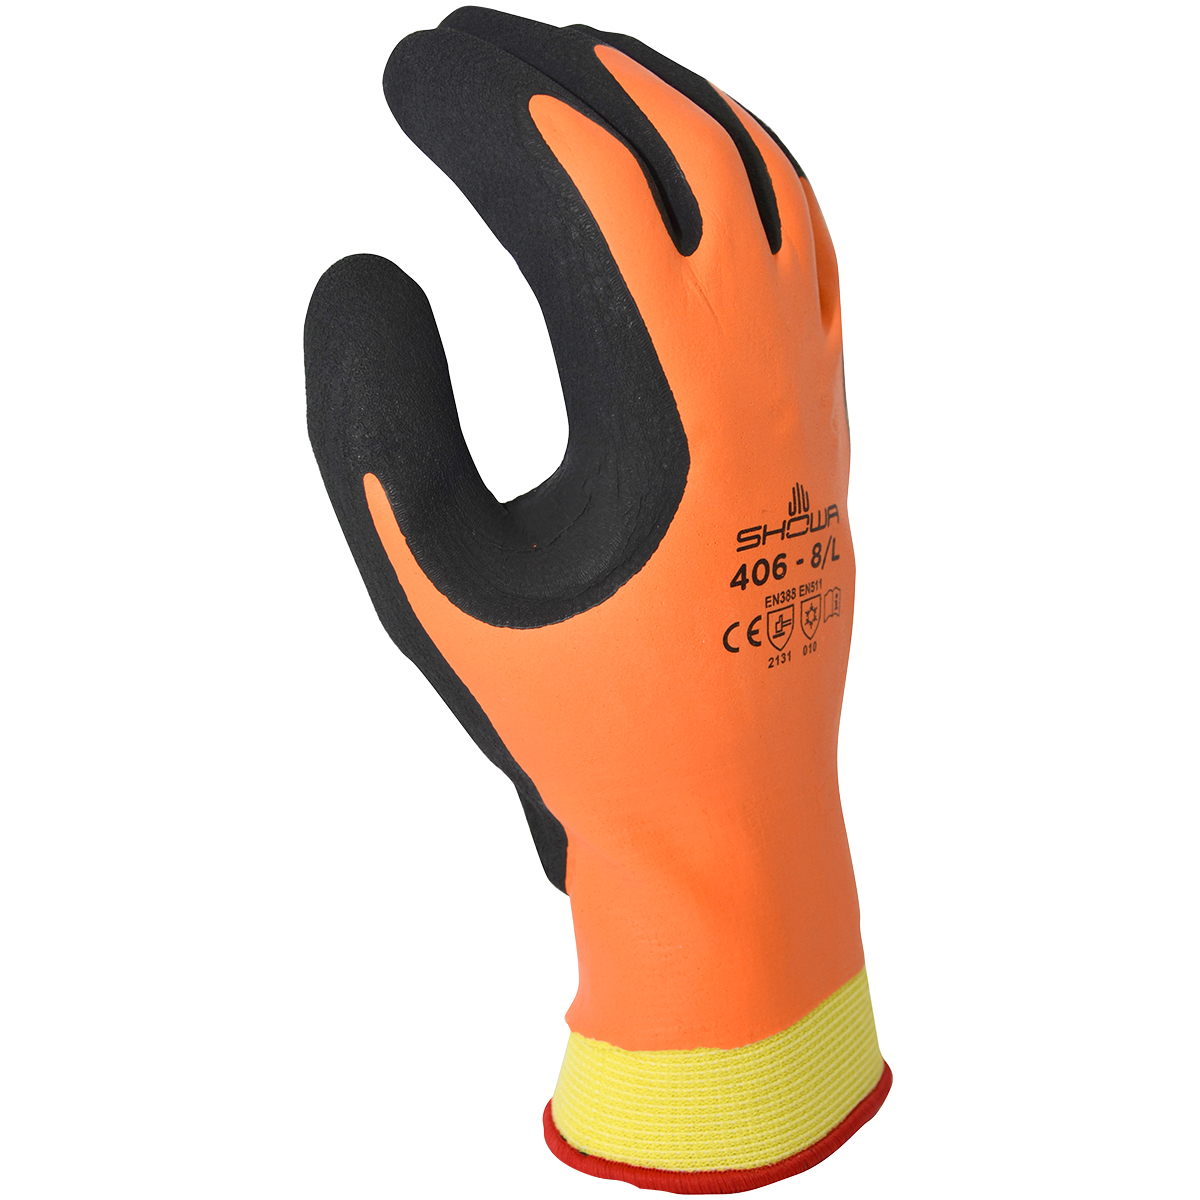 General purpose, dual natural rubber palm coating, acrylic nylon polyester insulated seamless liner, orange w/black coating, rough finish, large - General Purpose